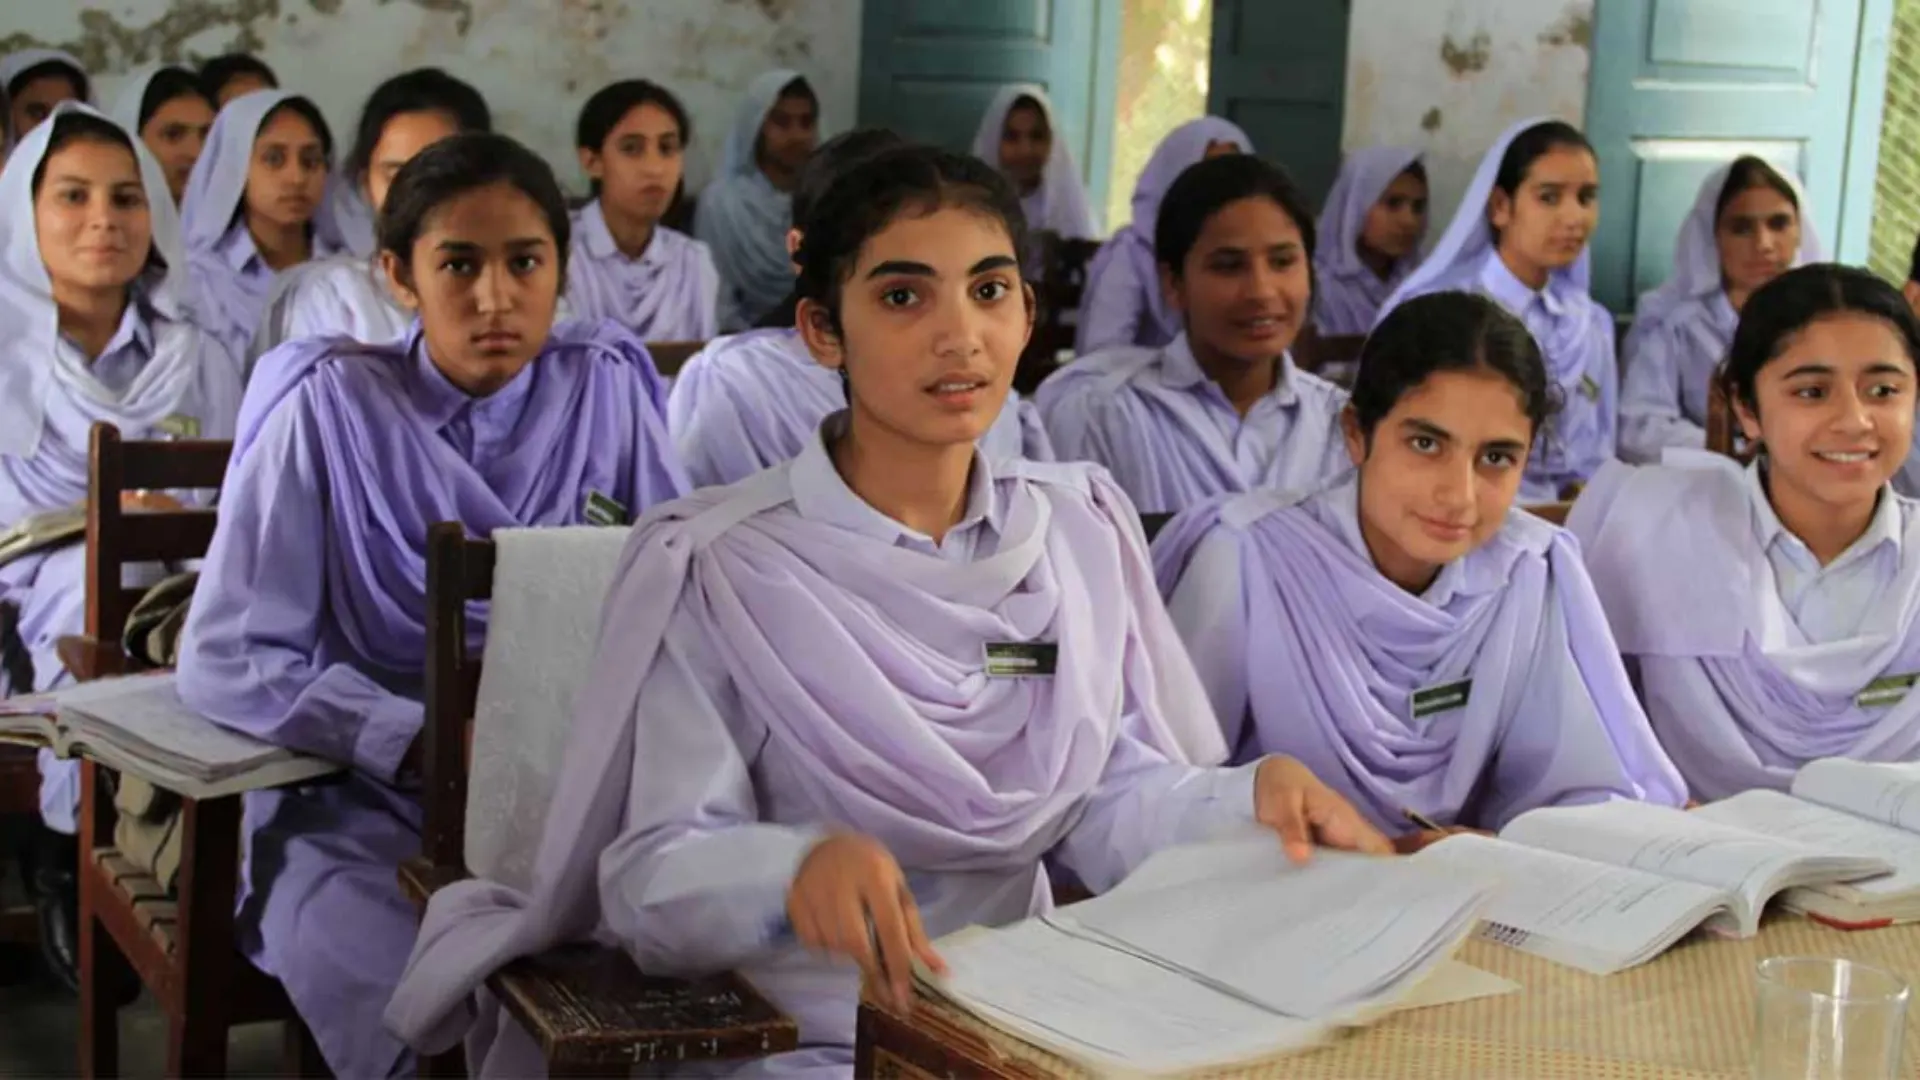 Importance of Education in Pakistan for Both Genders